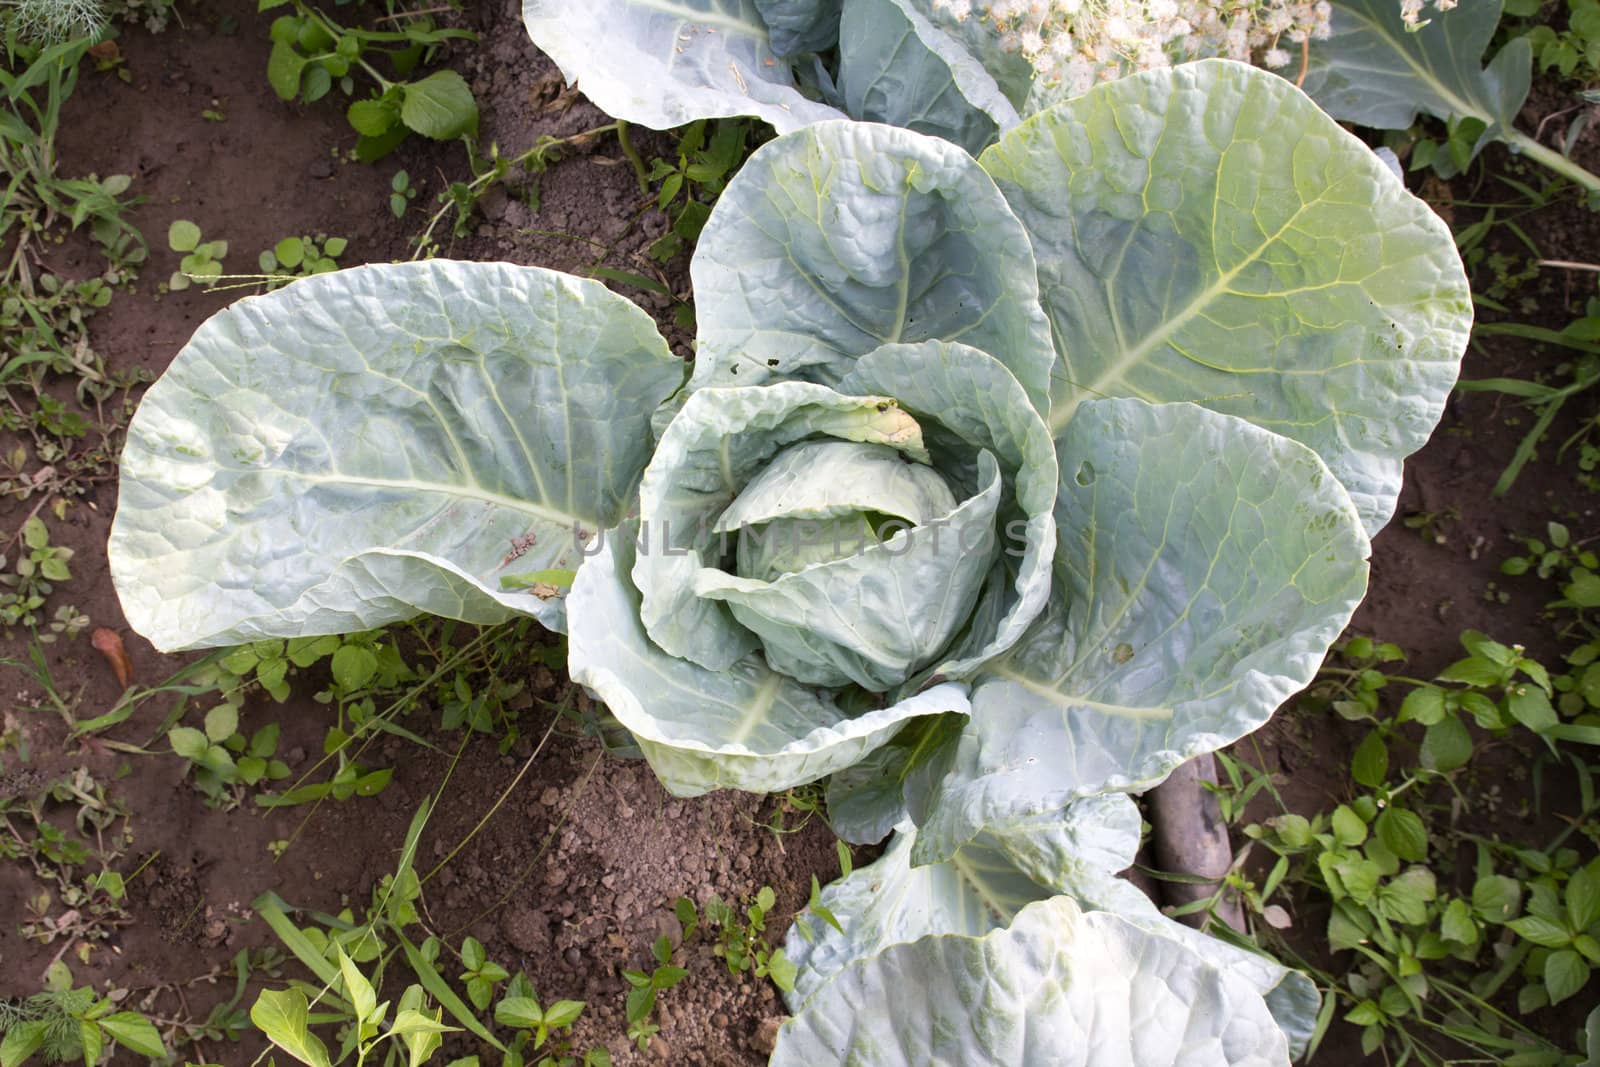 cabbages in the garden